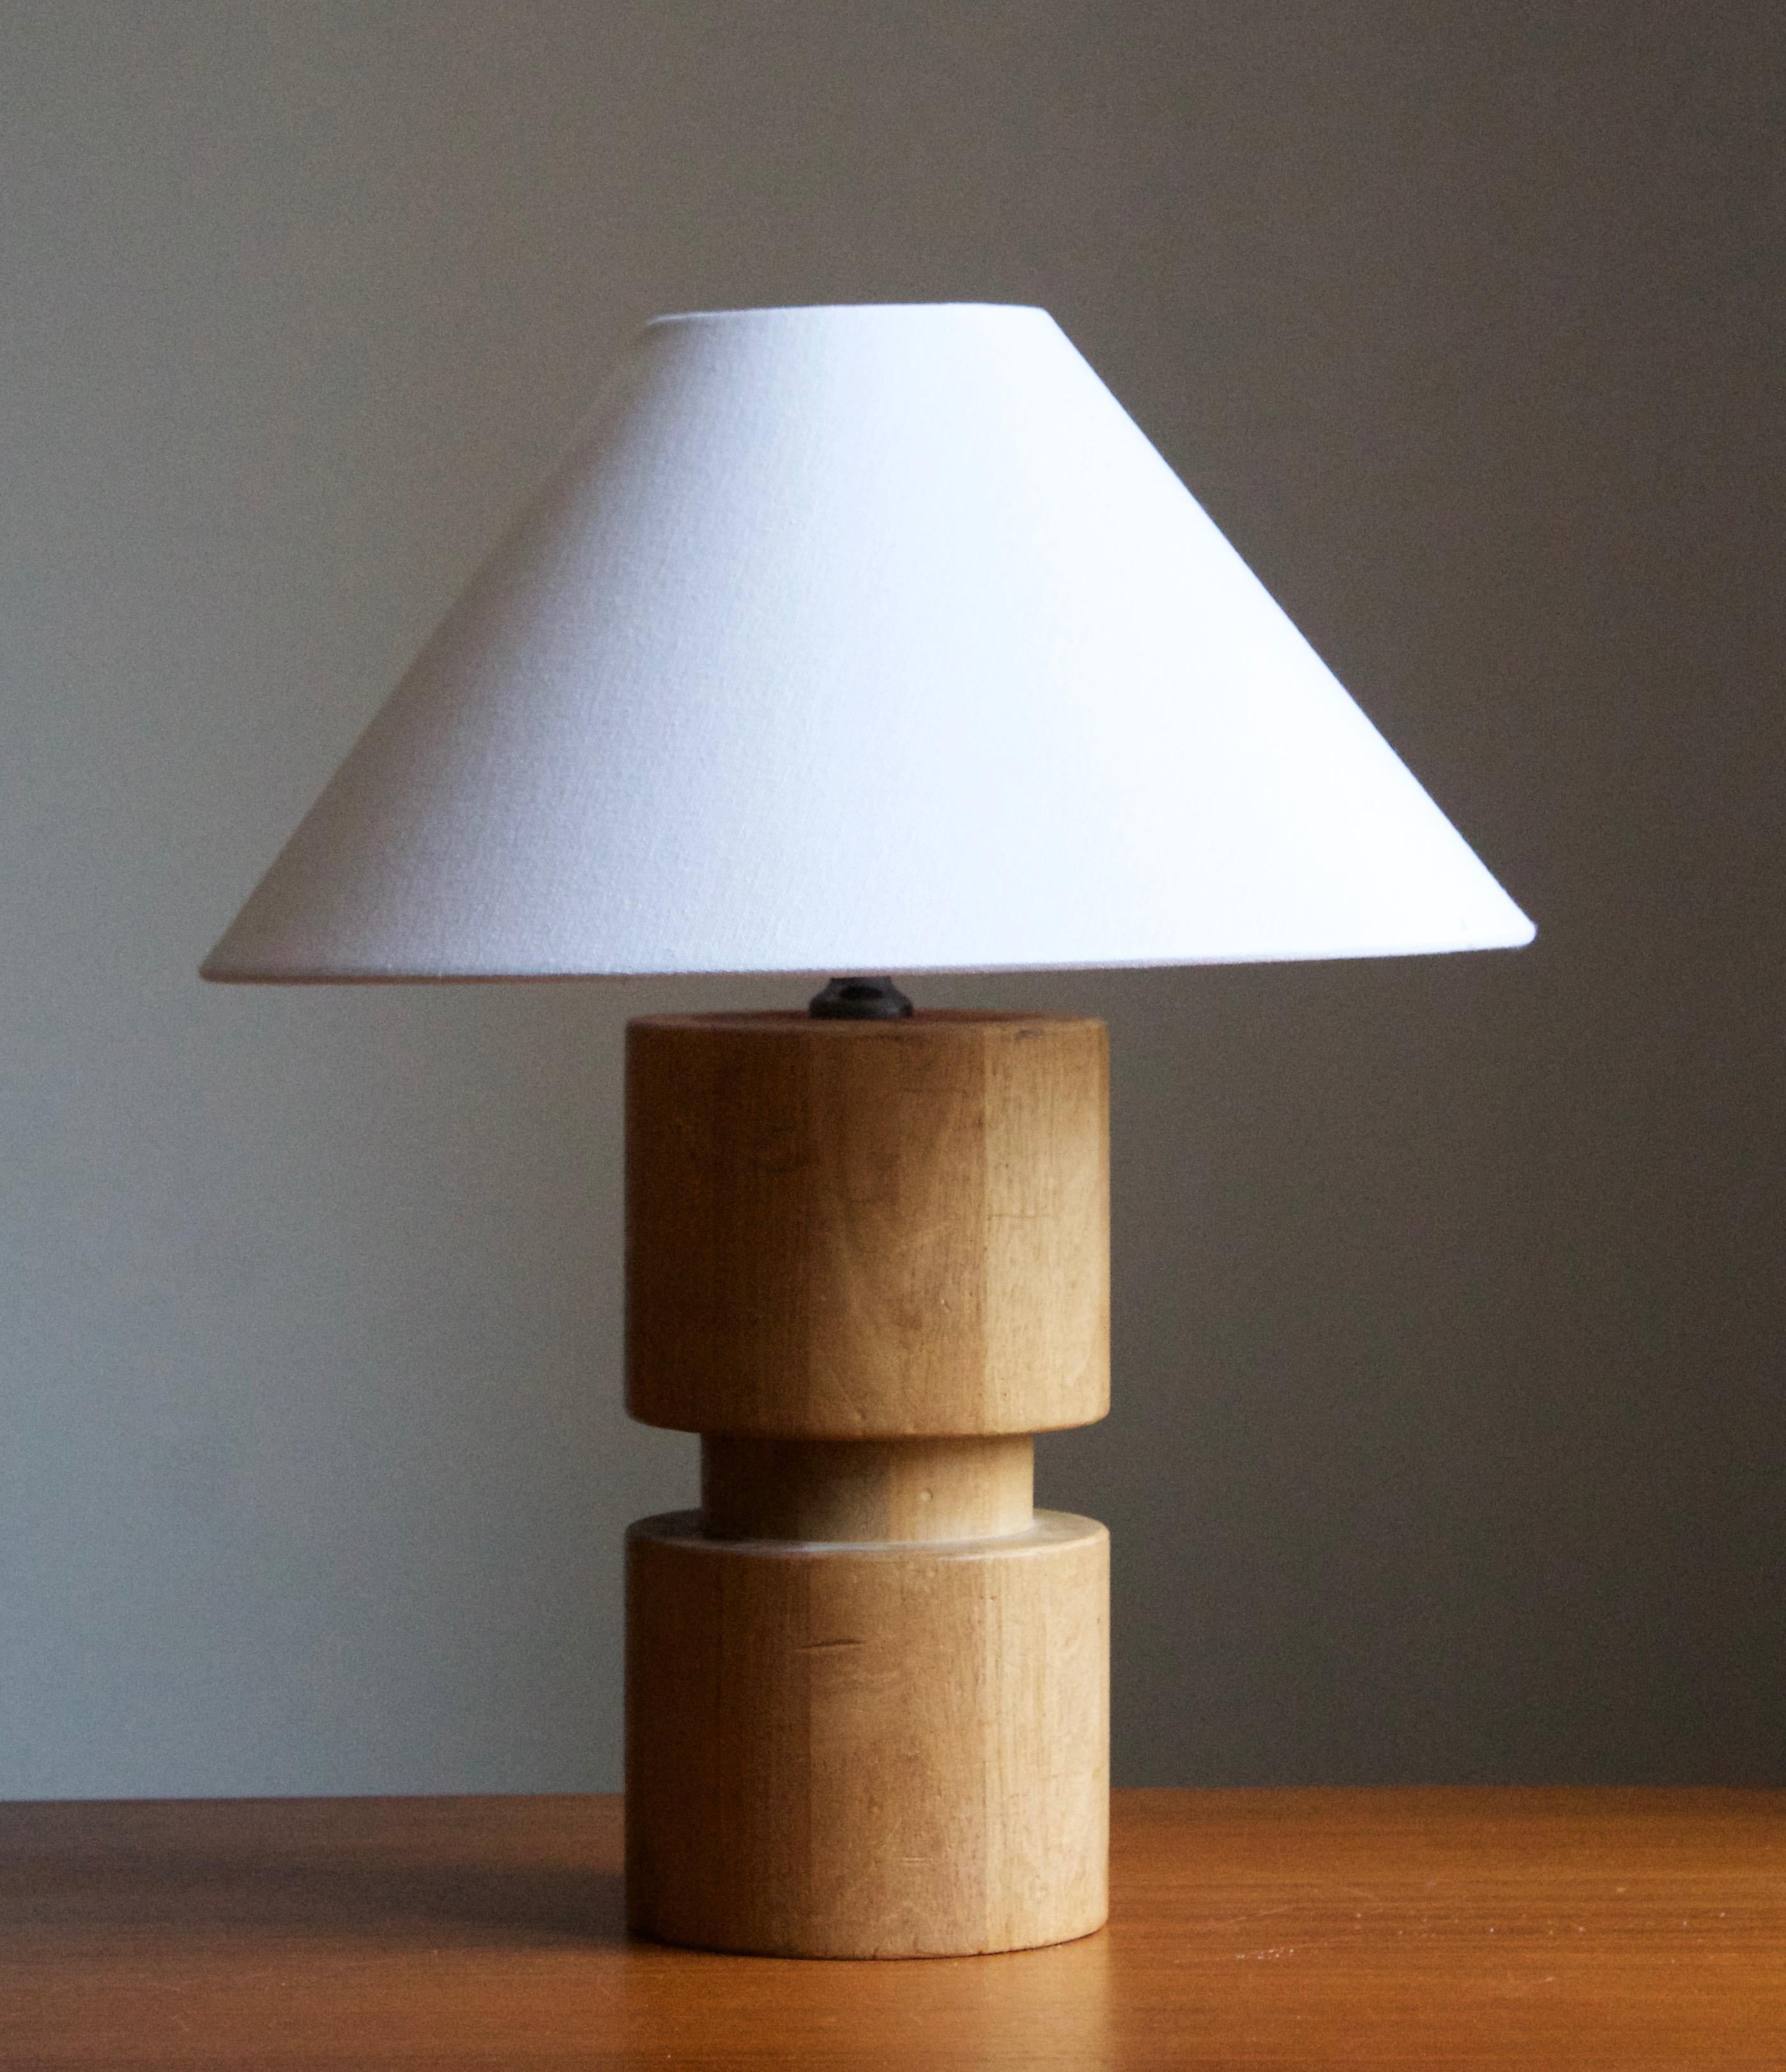 A sculptural table lamp. Lamp mounted atop of wooden architectural element, Sweden, c. 1940s.

Stated dimensions exclude lampshade. Height includes socket. The lampshade is not included in the purchase.